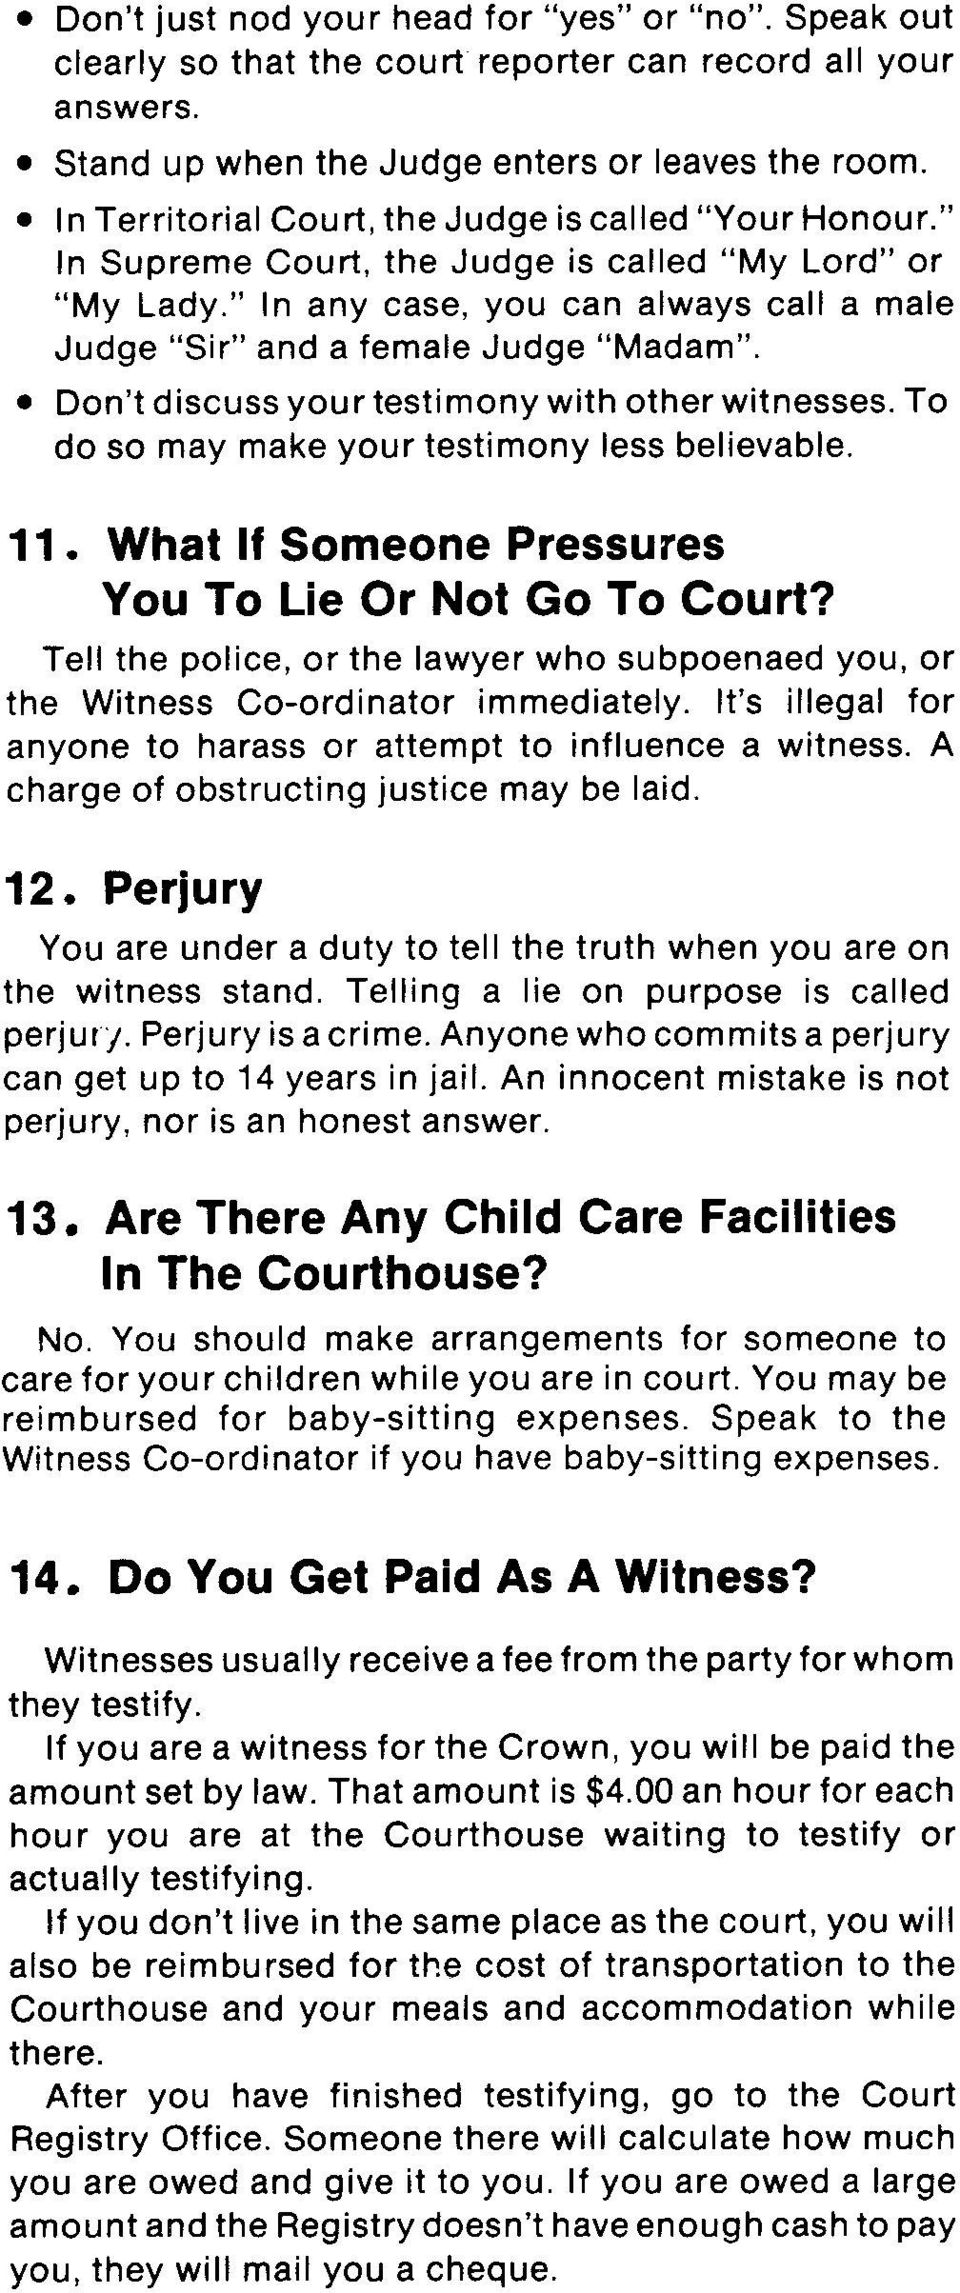 Don't discuss your testimony with other witnesses. To do so may make your testimony less believable. 11. What If Someone Pressures You To Lie Or Not Go To Court?